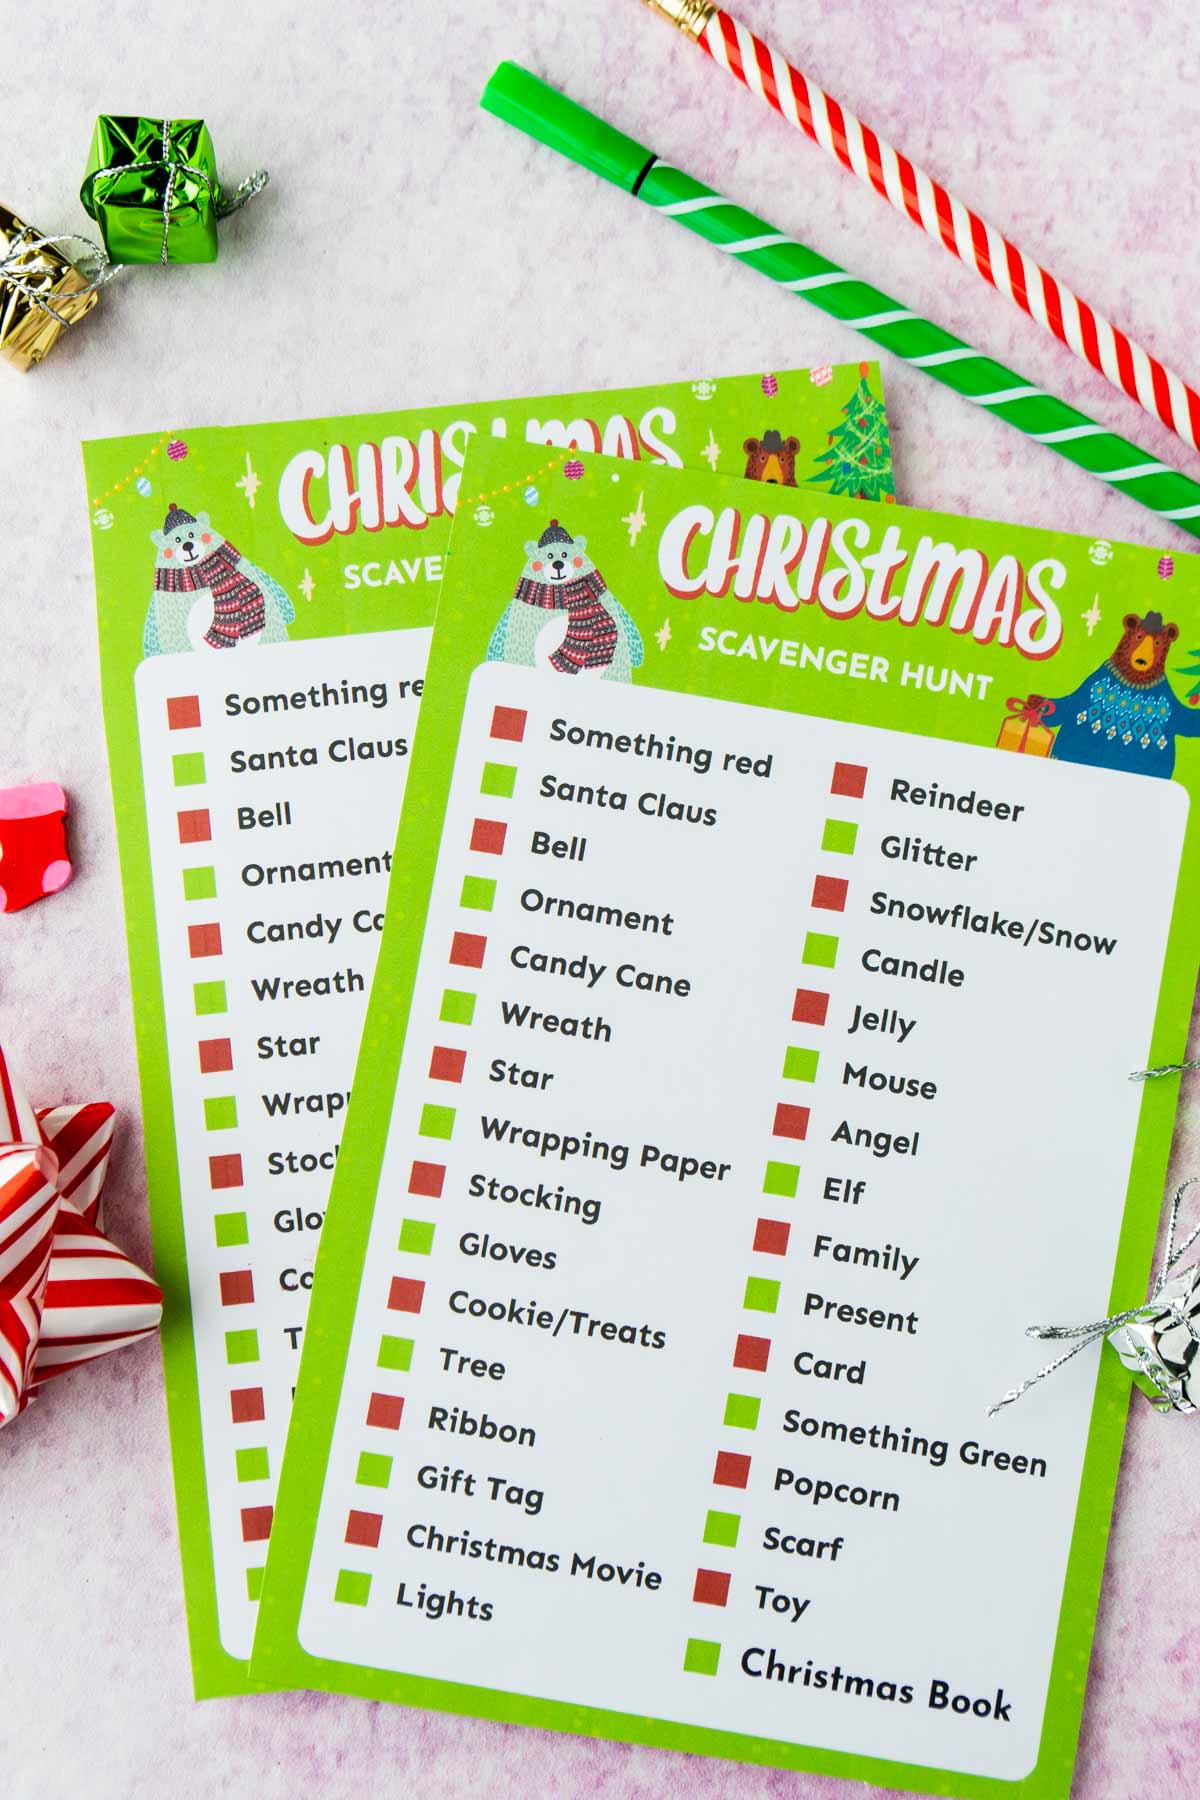 Printed out Christmas scavenger hunt for kids